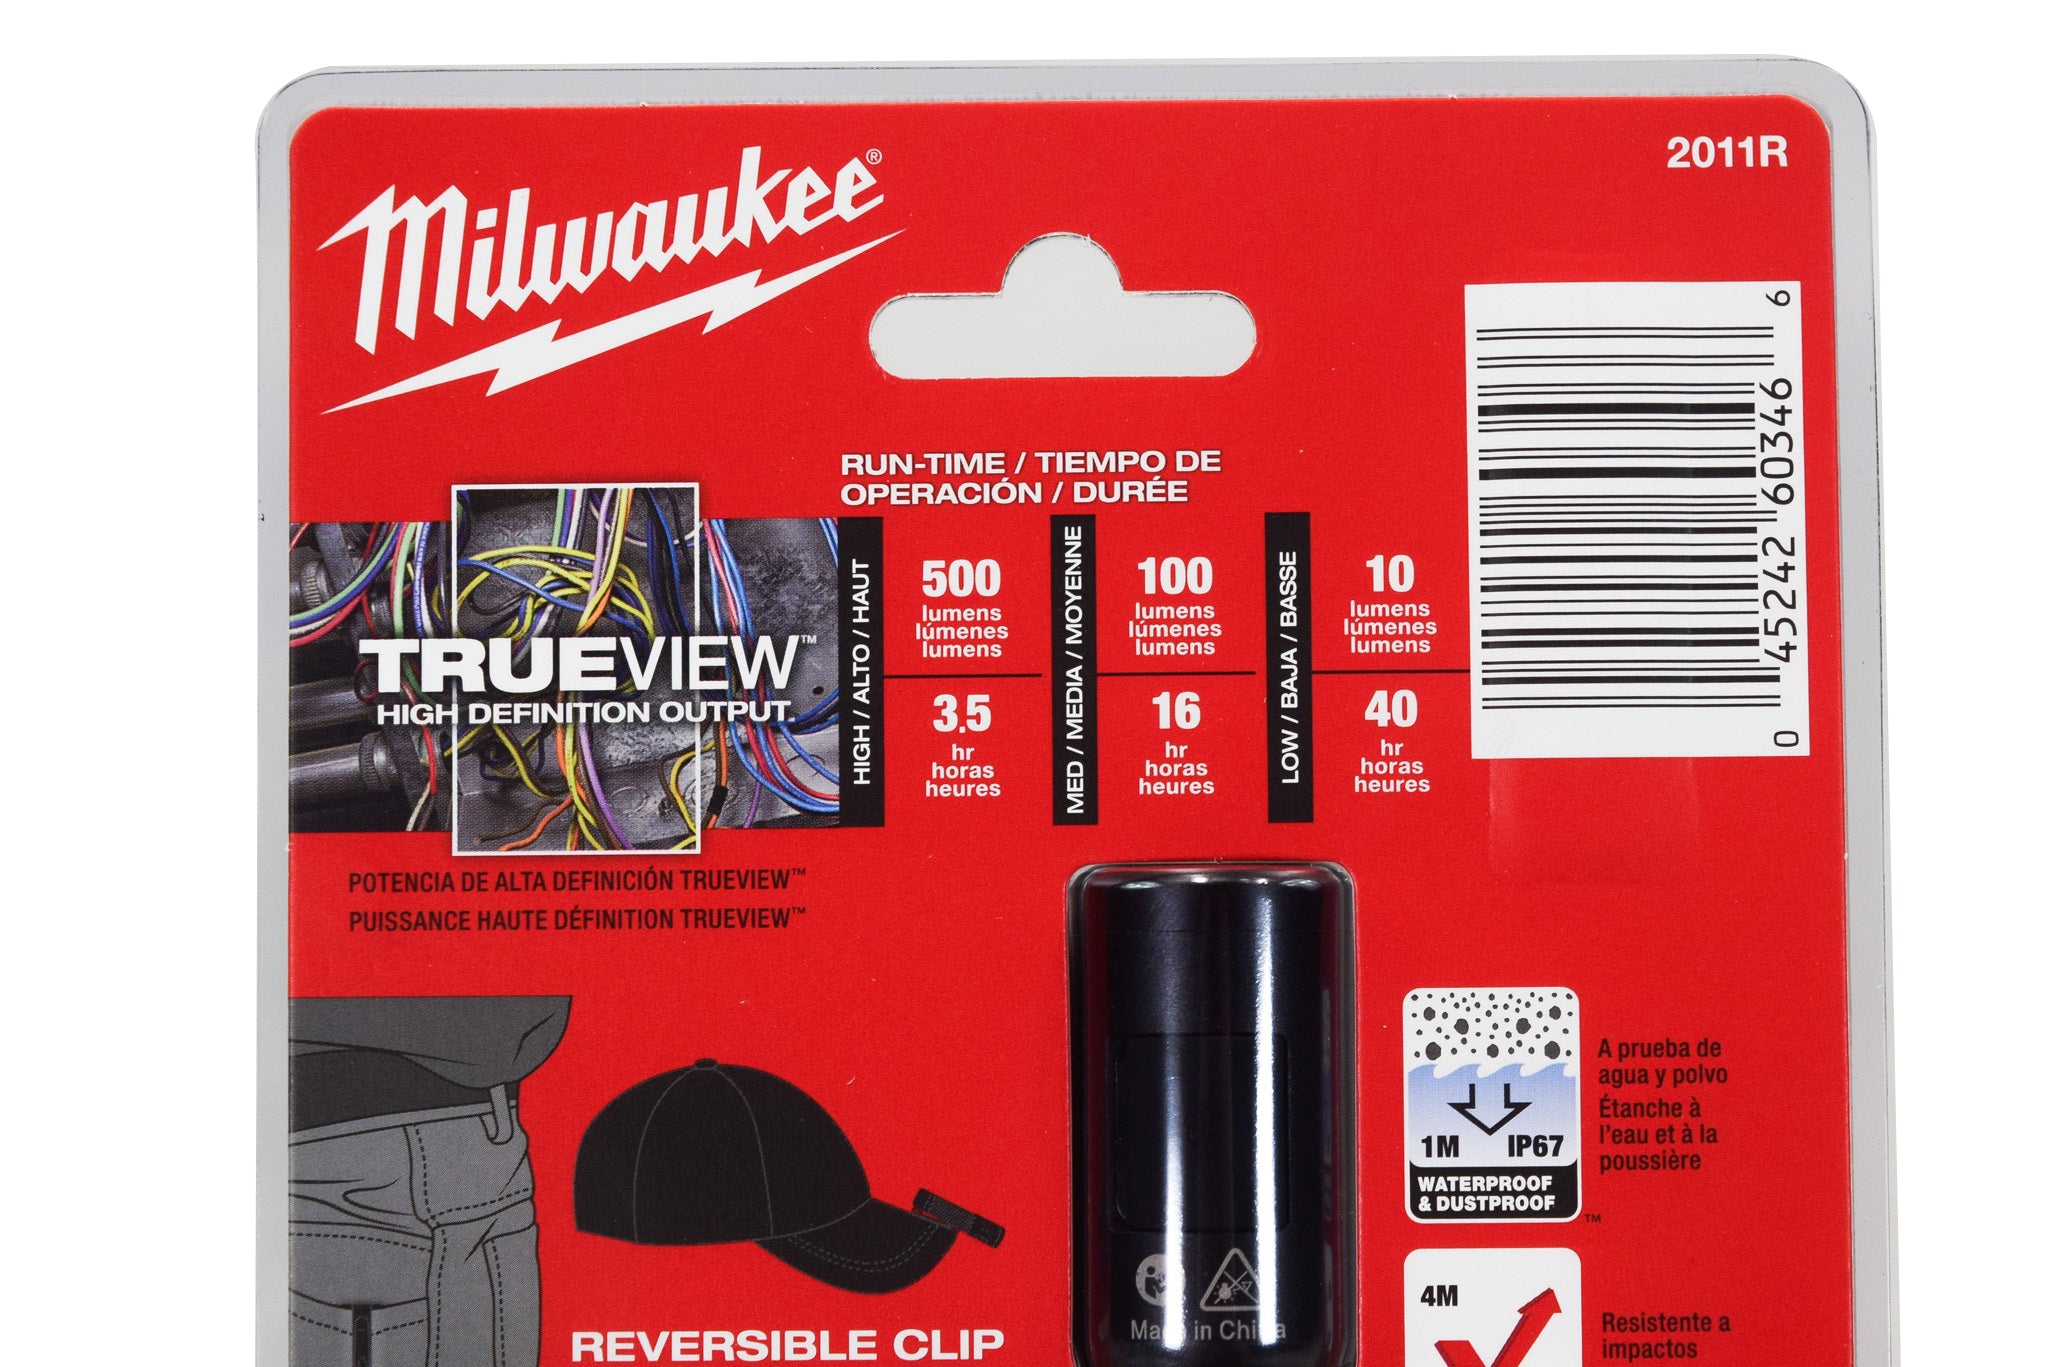 Milwauke 2011R Rechargeable 500L Everyday Carry Flashlight w/ Magnet